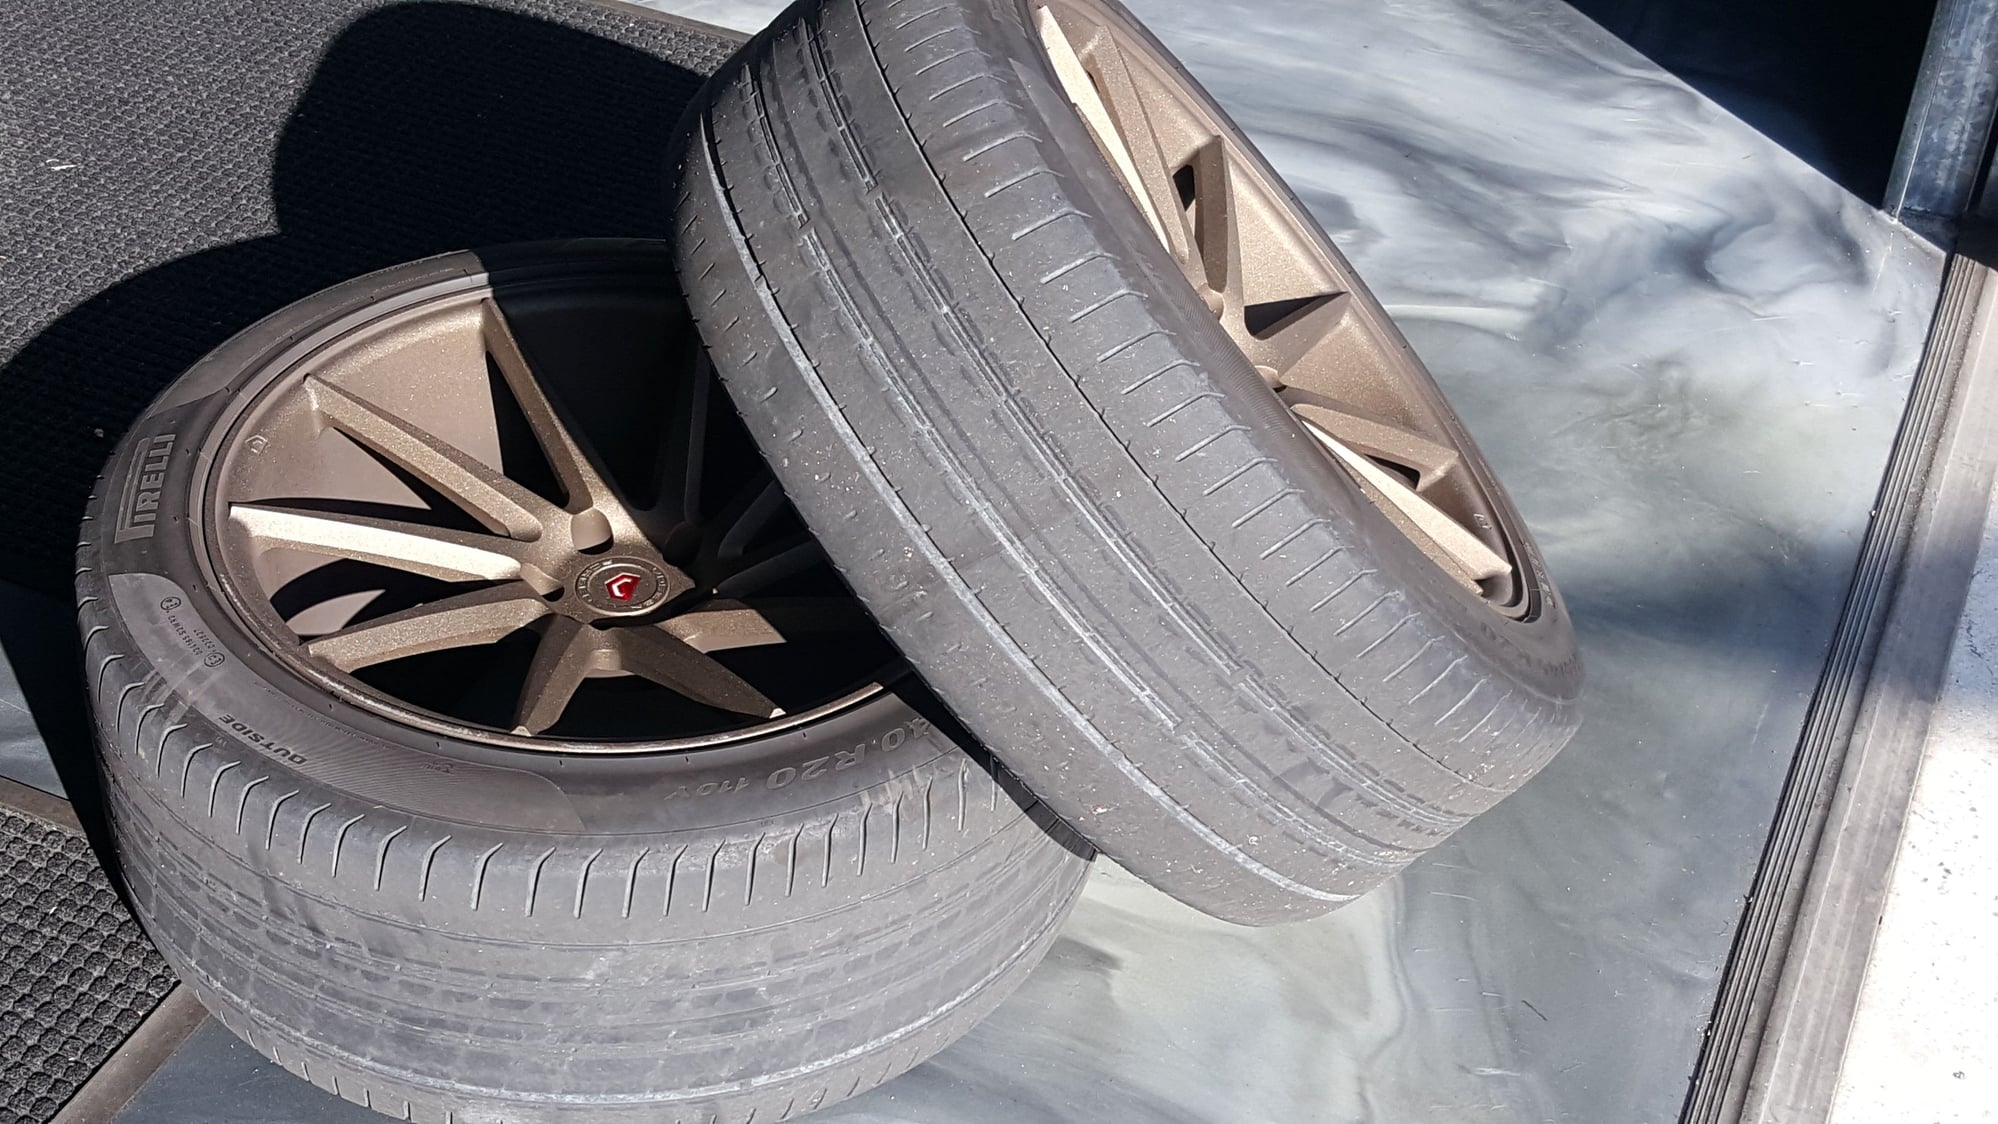 Wheels and Tires/Axles - Vossen 310T Wheels for Macan - Used - 2014 to 2019 Porsche Macan - Campbell-San Jose, CA 95008, United States